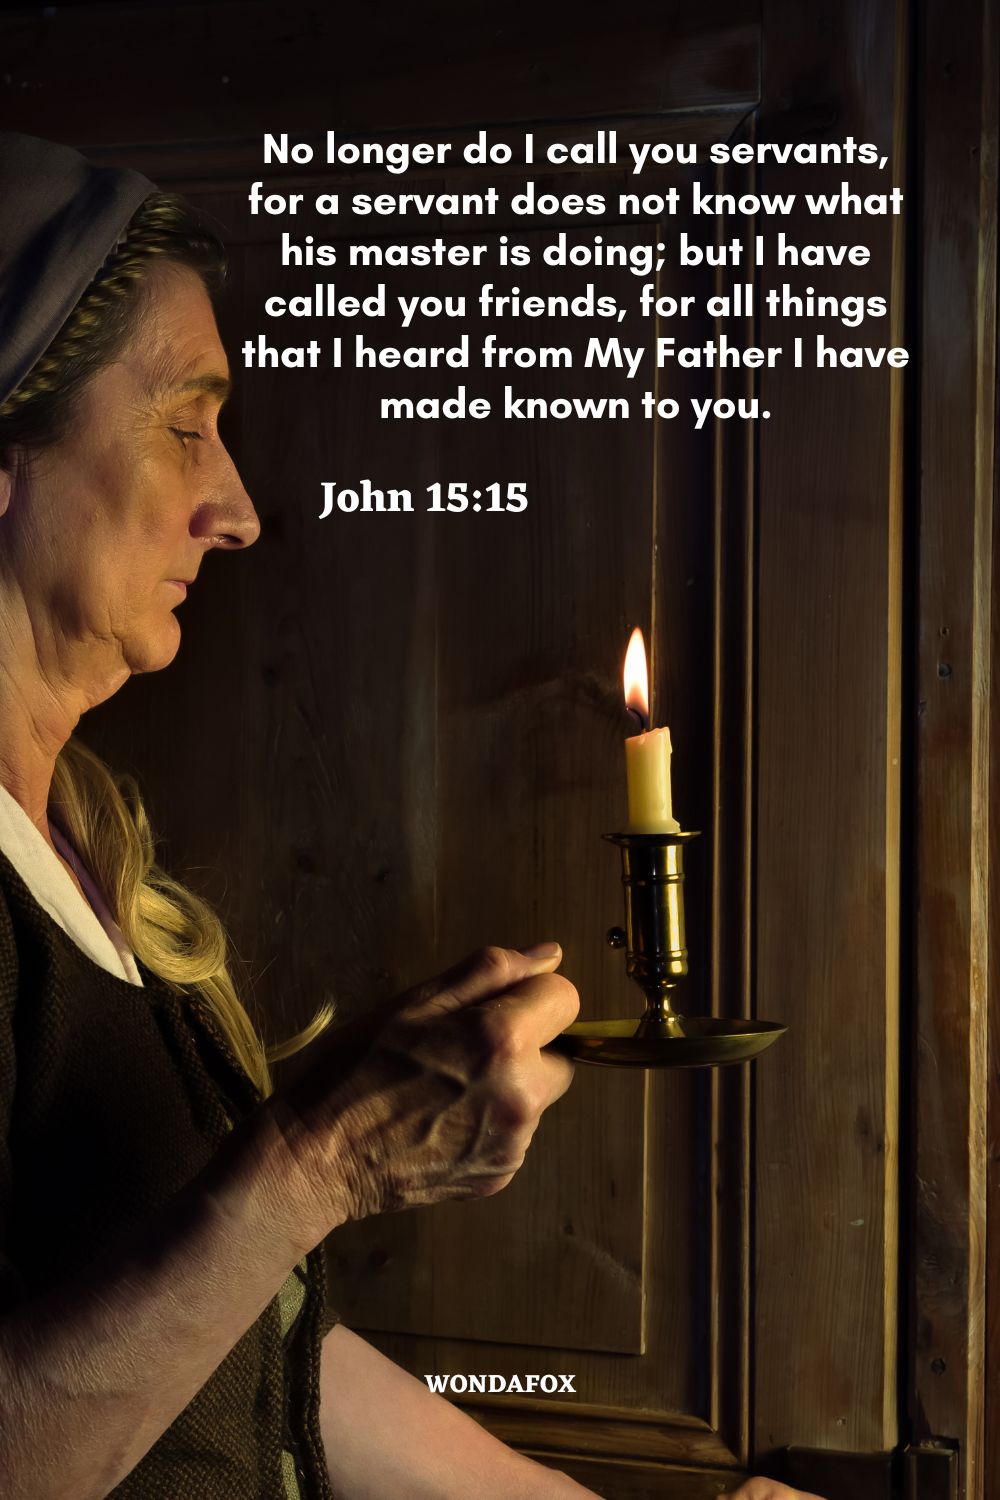 No longer do I call you servants, for a servant does not know what his master is doing; but I have called you friends, for all things that I heard from My Father I have made known to you.
John 15:15